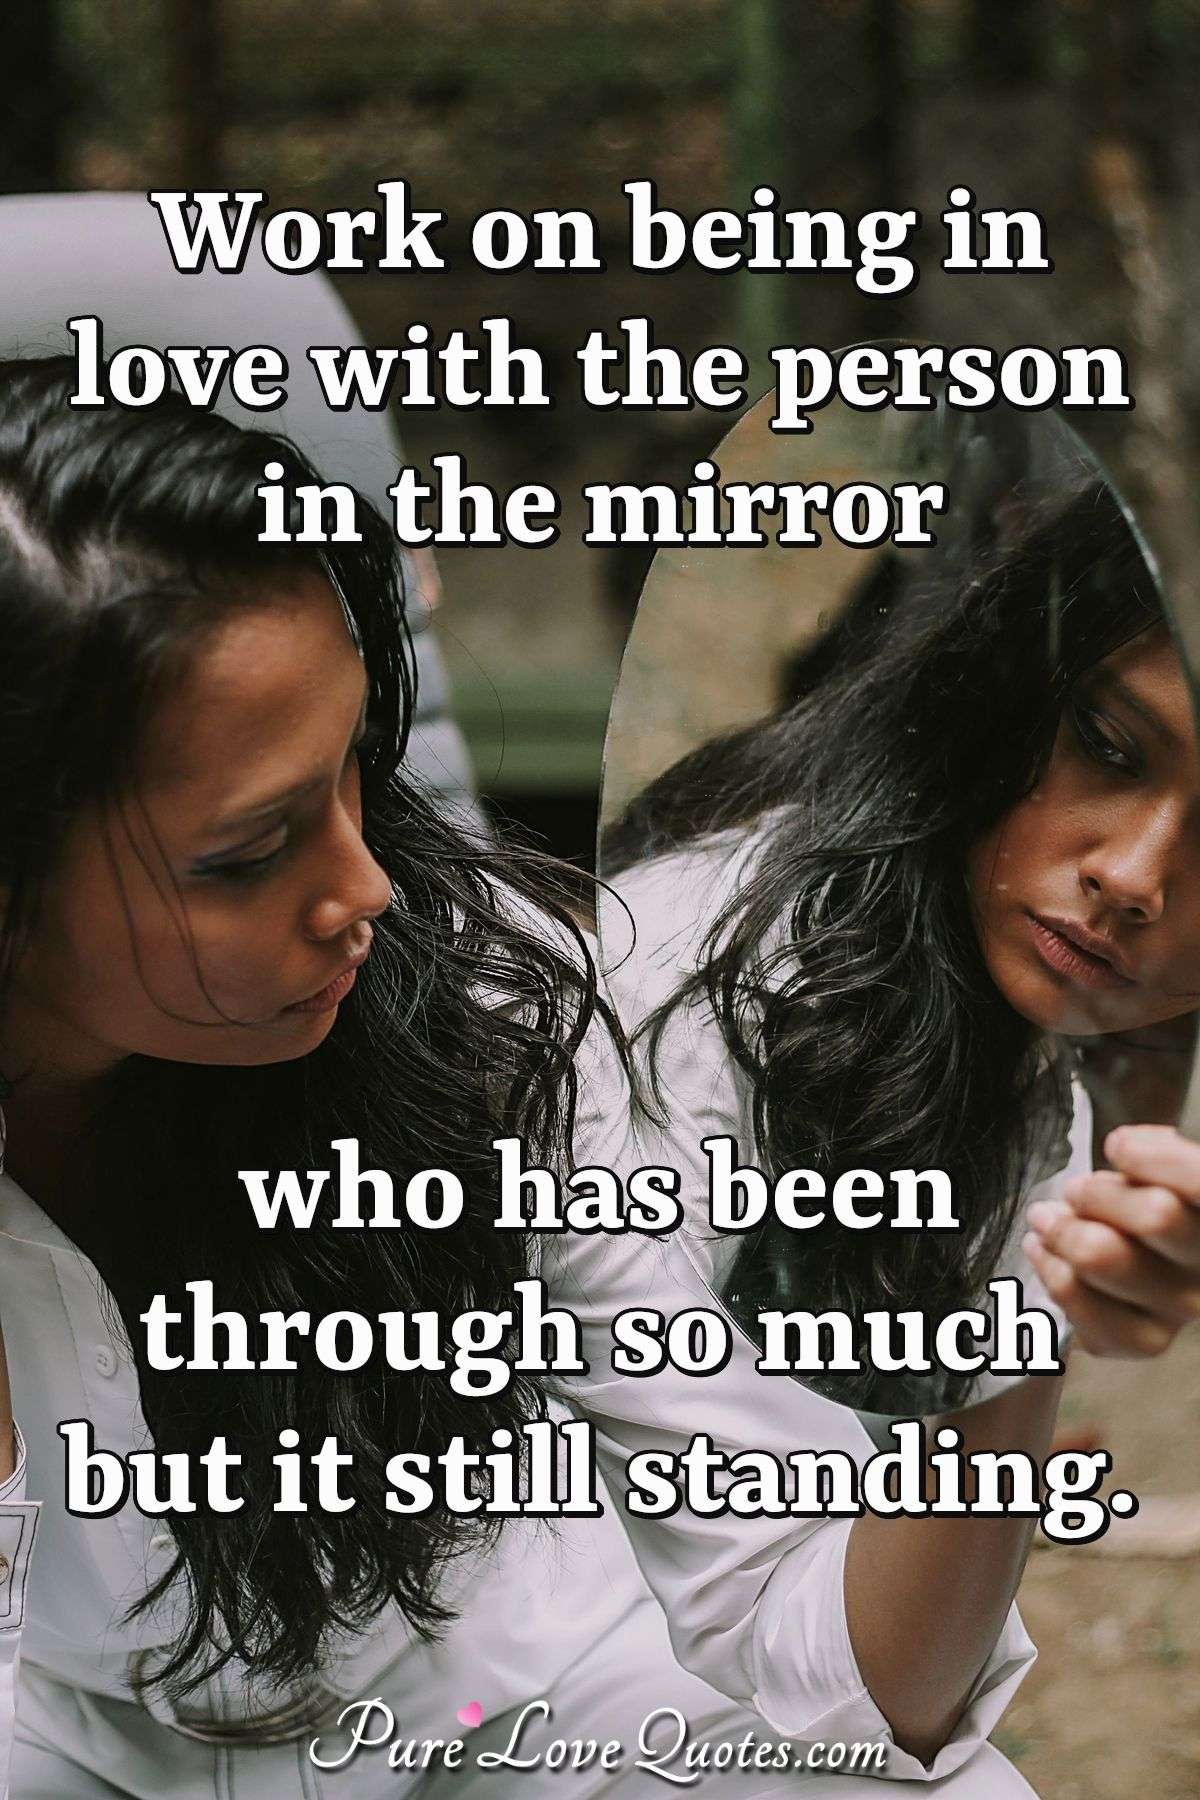 Work on being in love with the person in the mirror who has been through so much but it still standing. - Anonymous